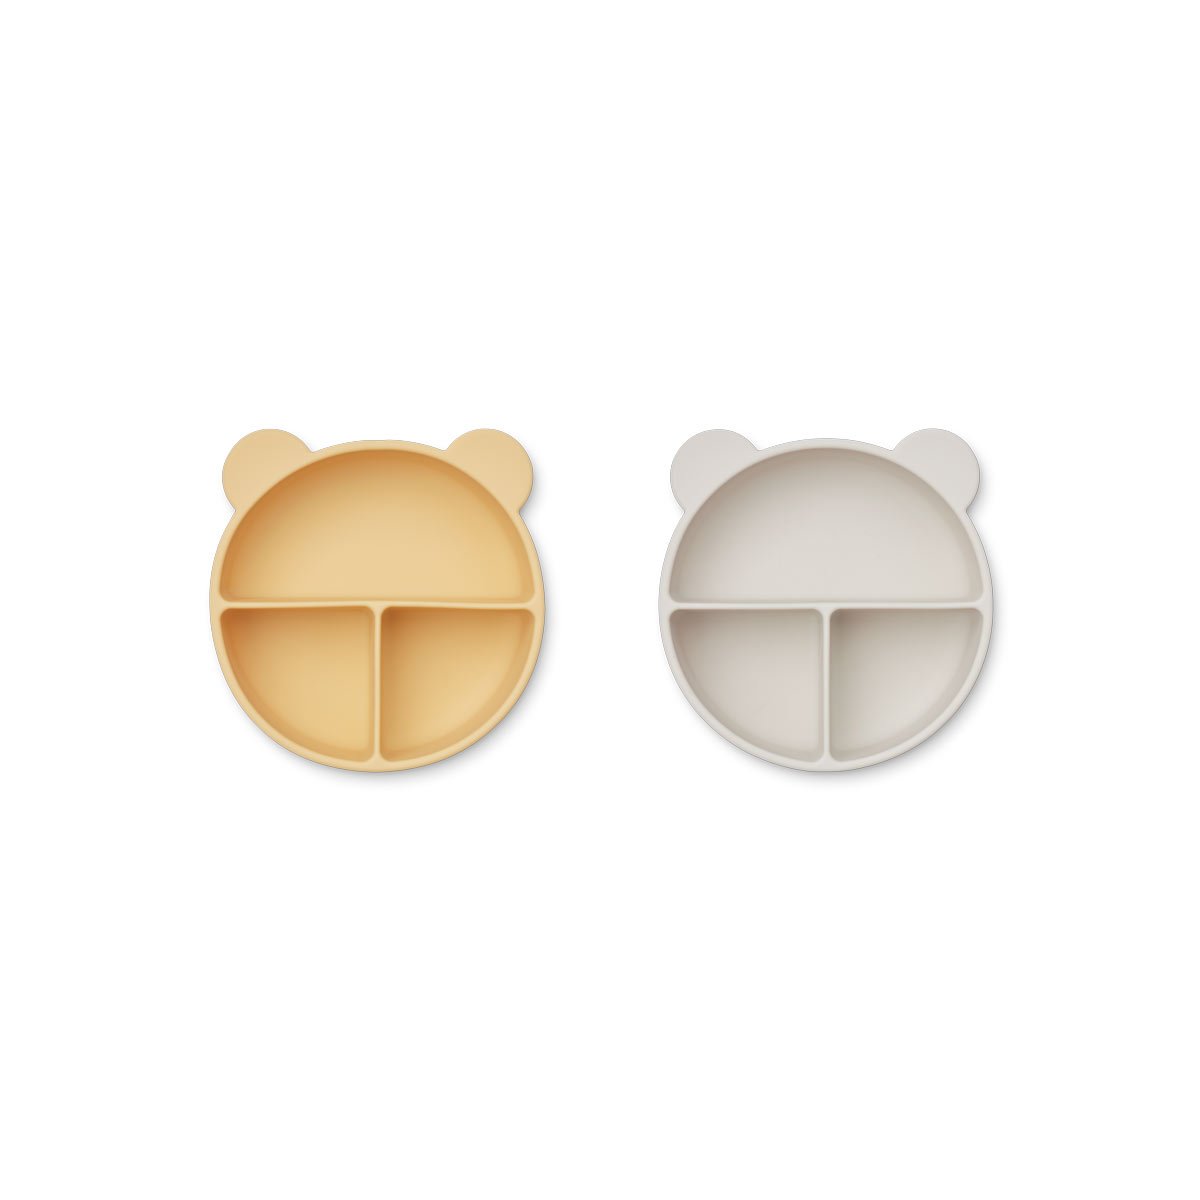 Boys & Girls Yellow Bear Silicone Plates(2 Pack)